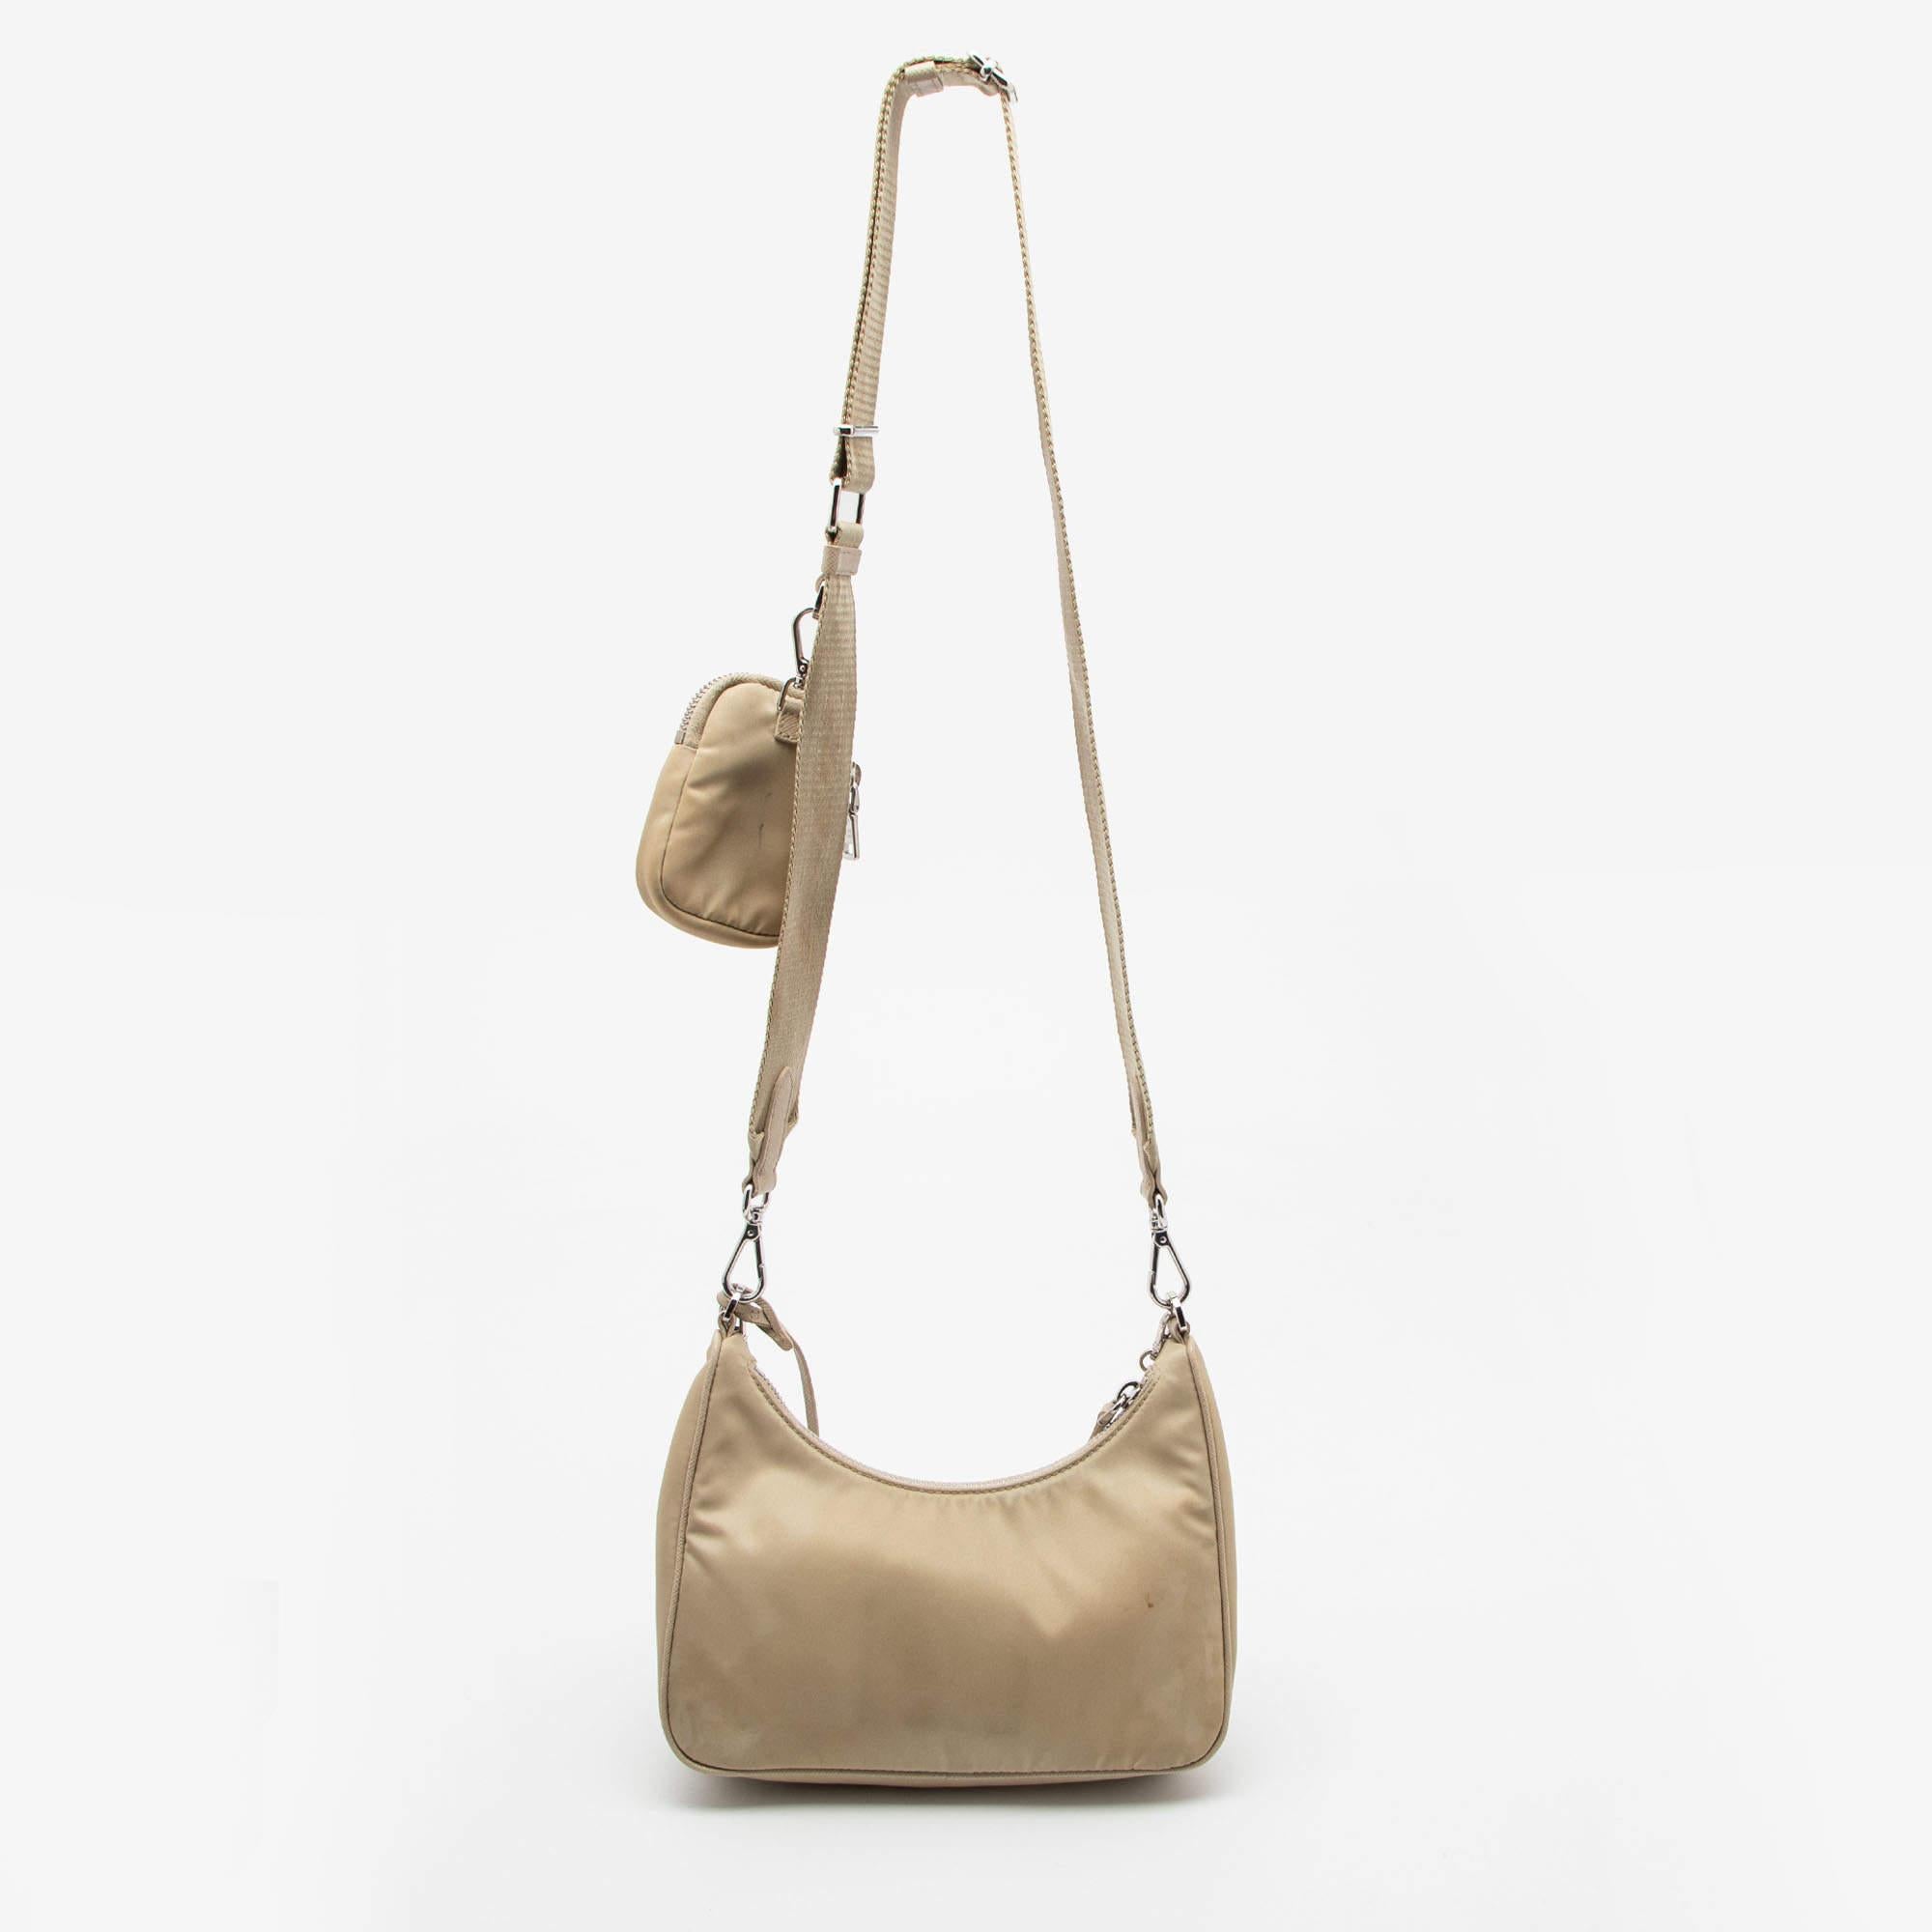 The petite silhouette and classic elements made the Prada Re-Edition 2005 bag an instant hit among fashionistas. Inspired by the classic mini hobo bag, this beige creation comes made from nylon and features a pouch attached to the single handle at